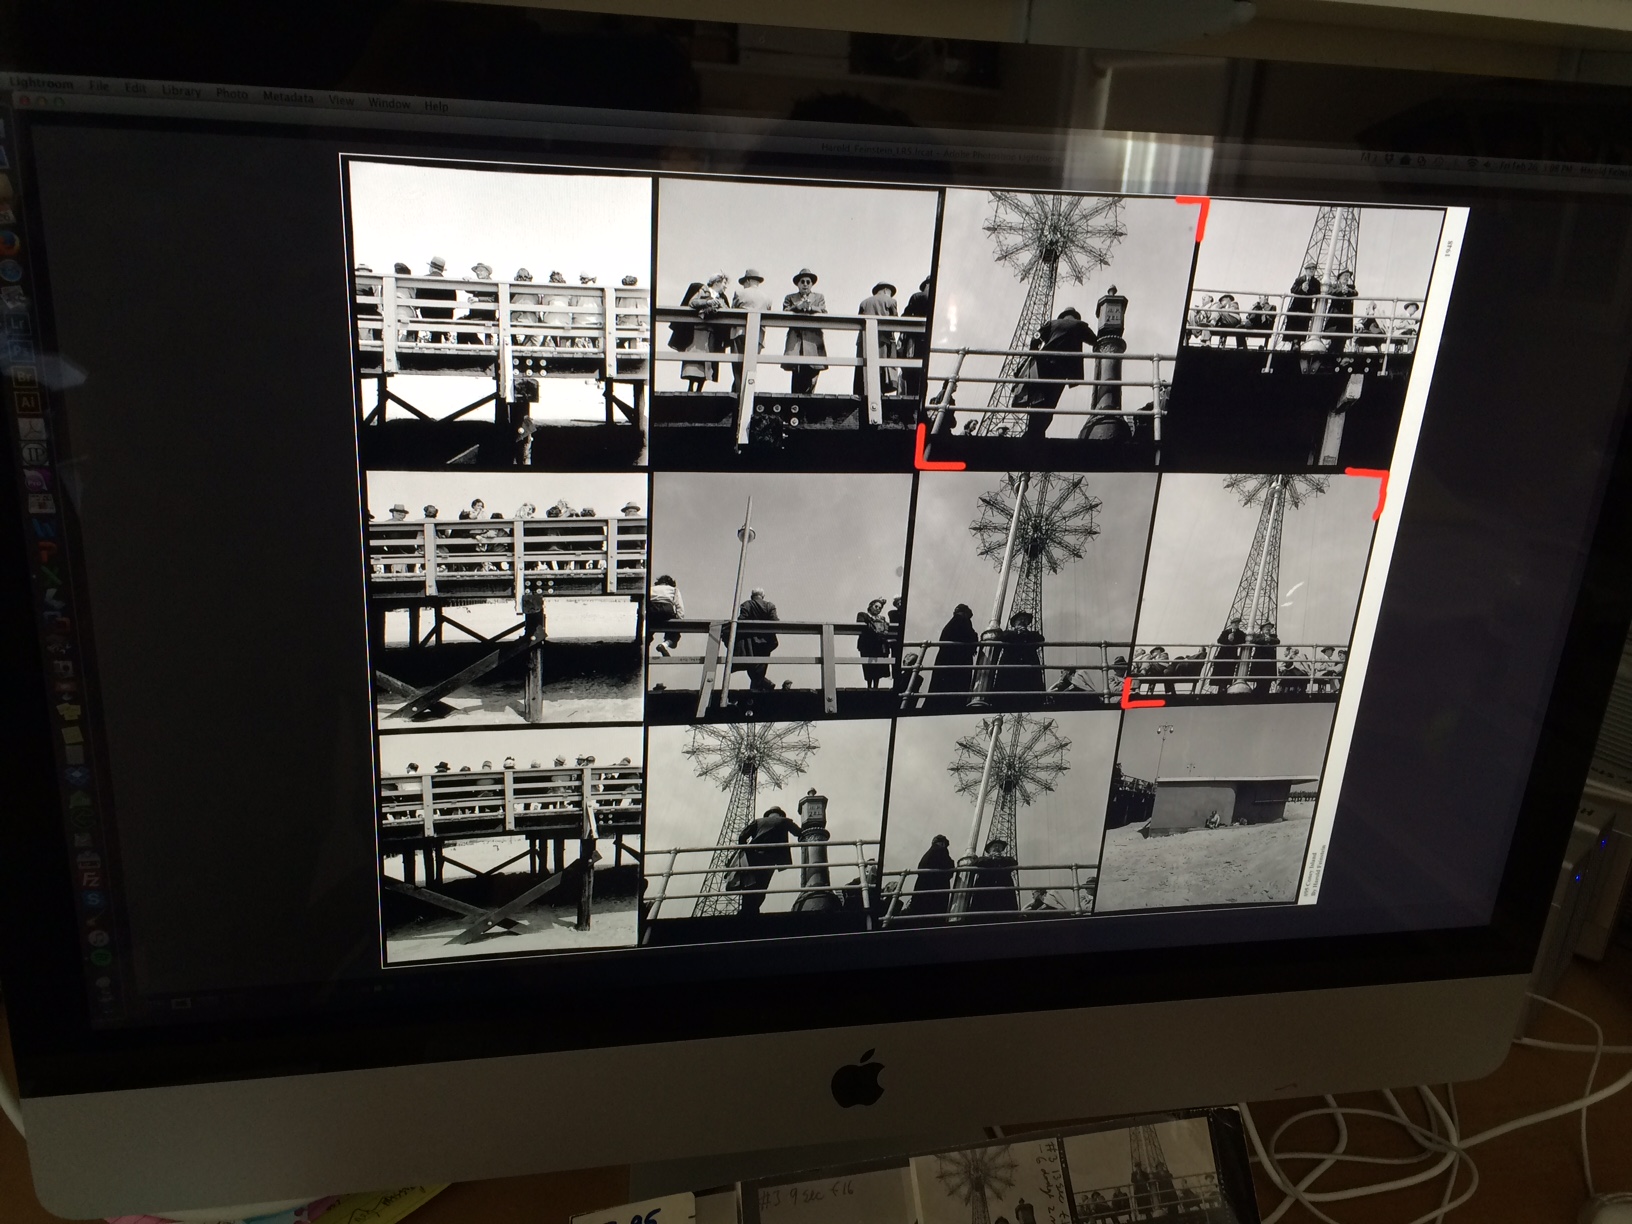 Images from the 8x10 contact sheet digitized and viewed on the 27" screen.  